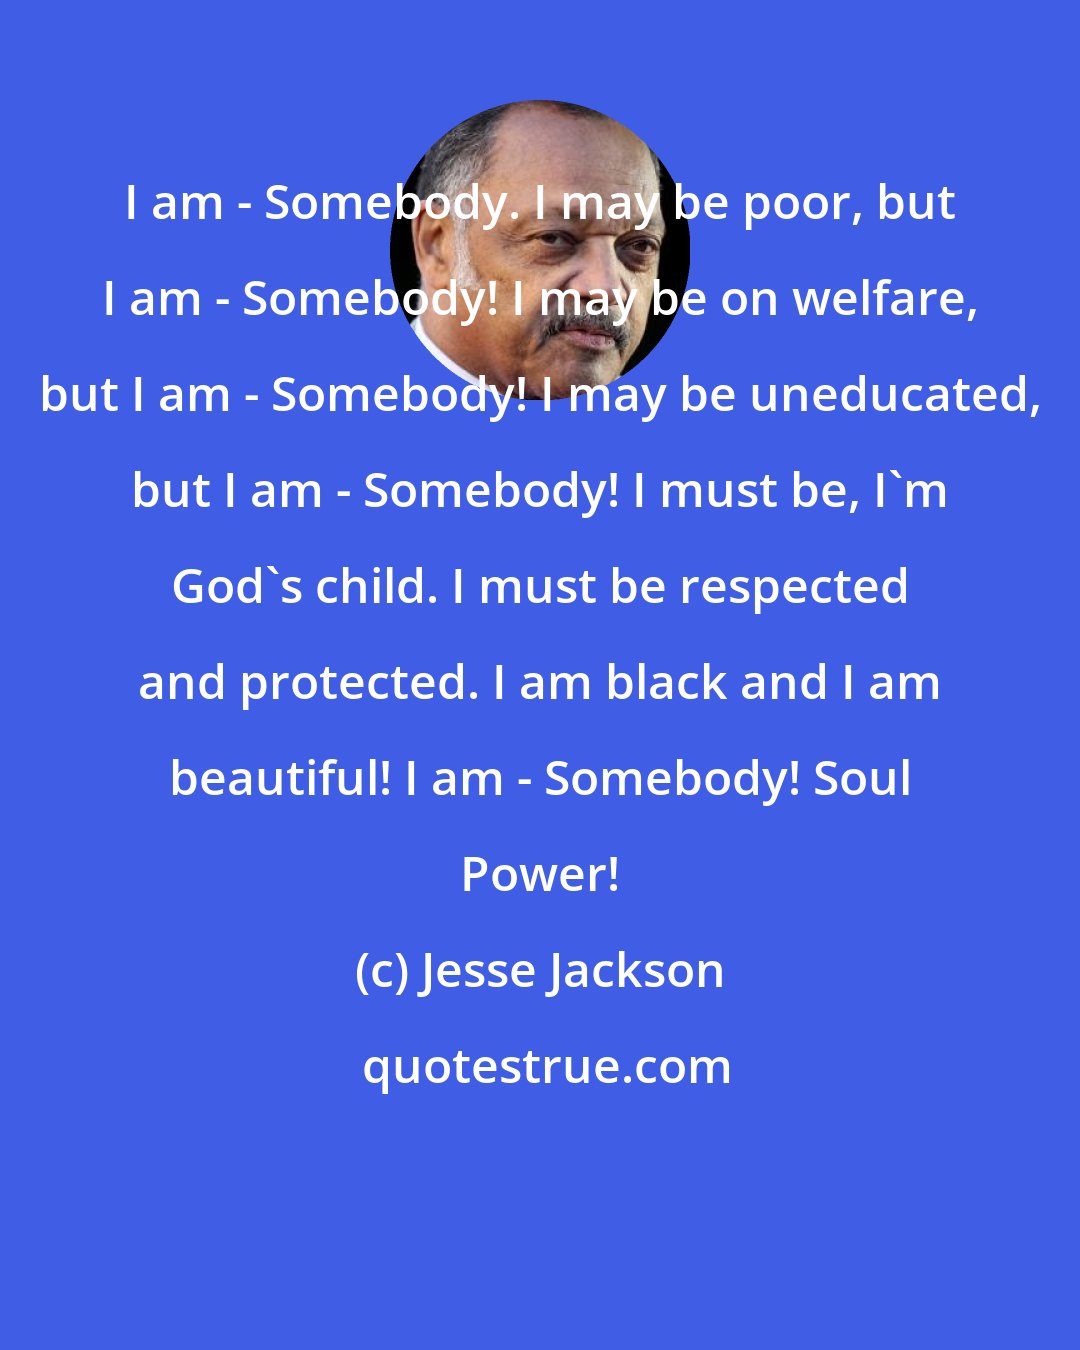 Jesse Jackson: I am - Somebody. I may be poor, but I am - Somebody! I may be on welfare, but I am - Somebody! I may be uneducated, but I am - Somebody! I must be, I'm God's child. I must be respected and protected. I am black and I am beautiful! I am - Somebody! Soul Power!